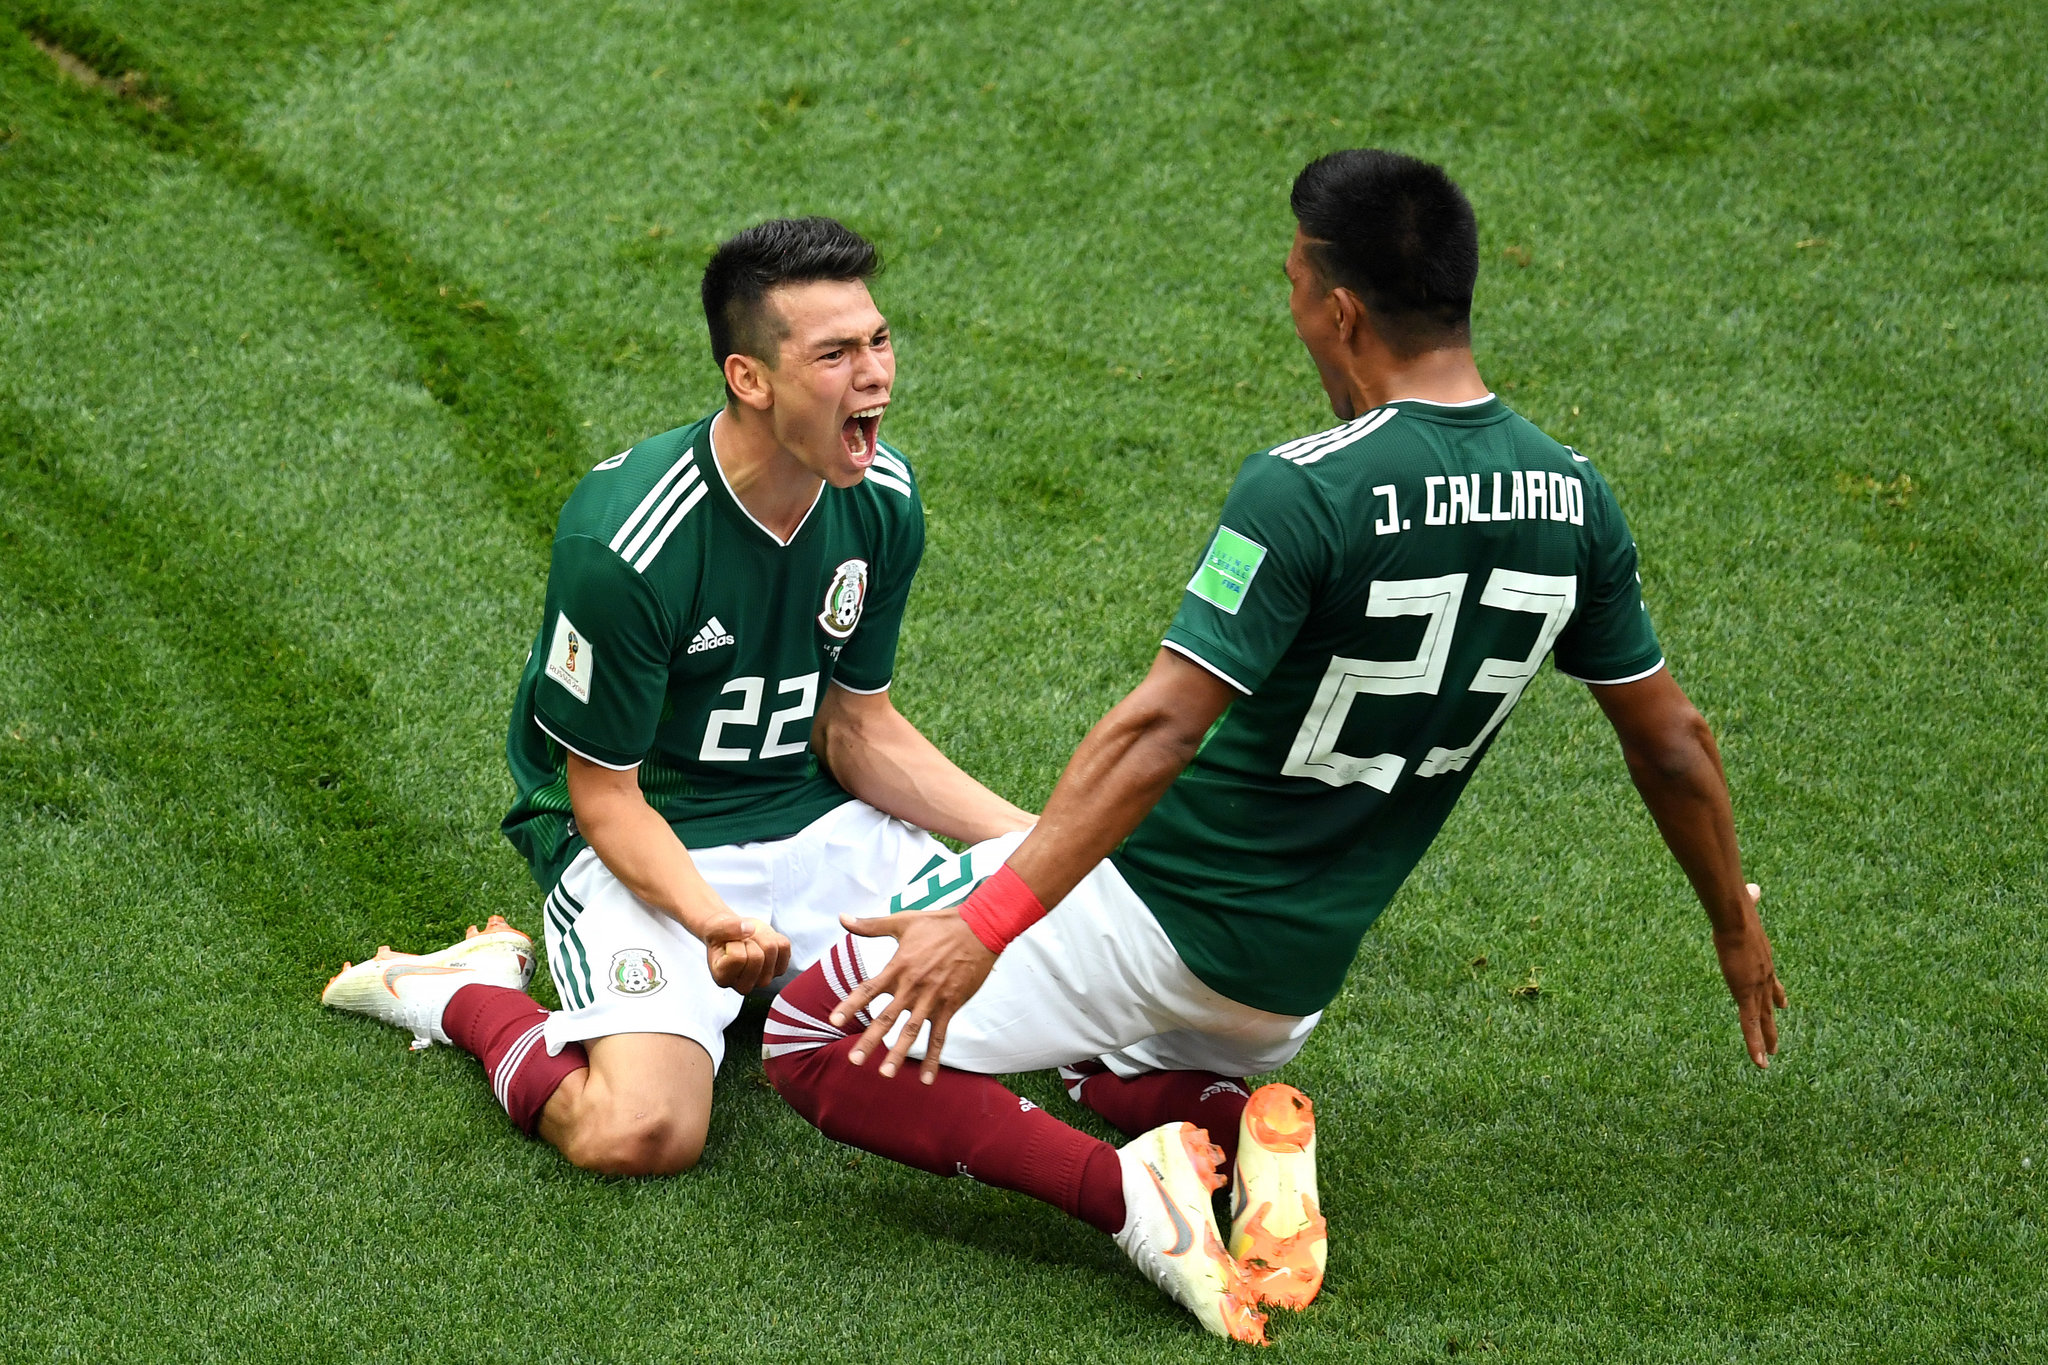 Mexico Shocks Germany in World Cup 2018